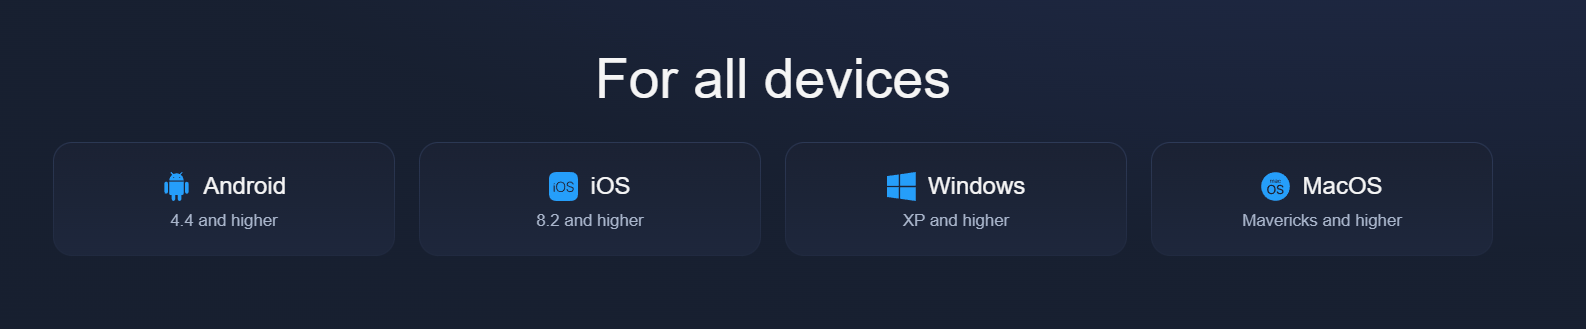 experoptions for all devices